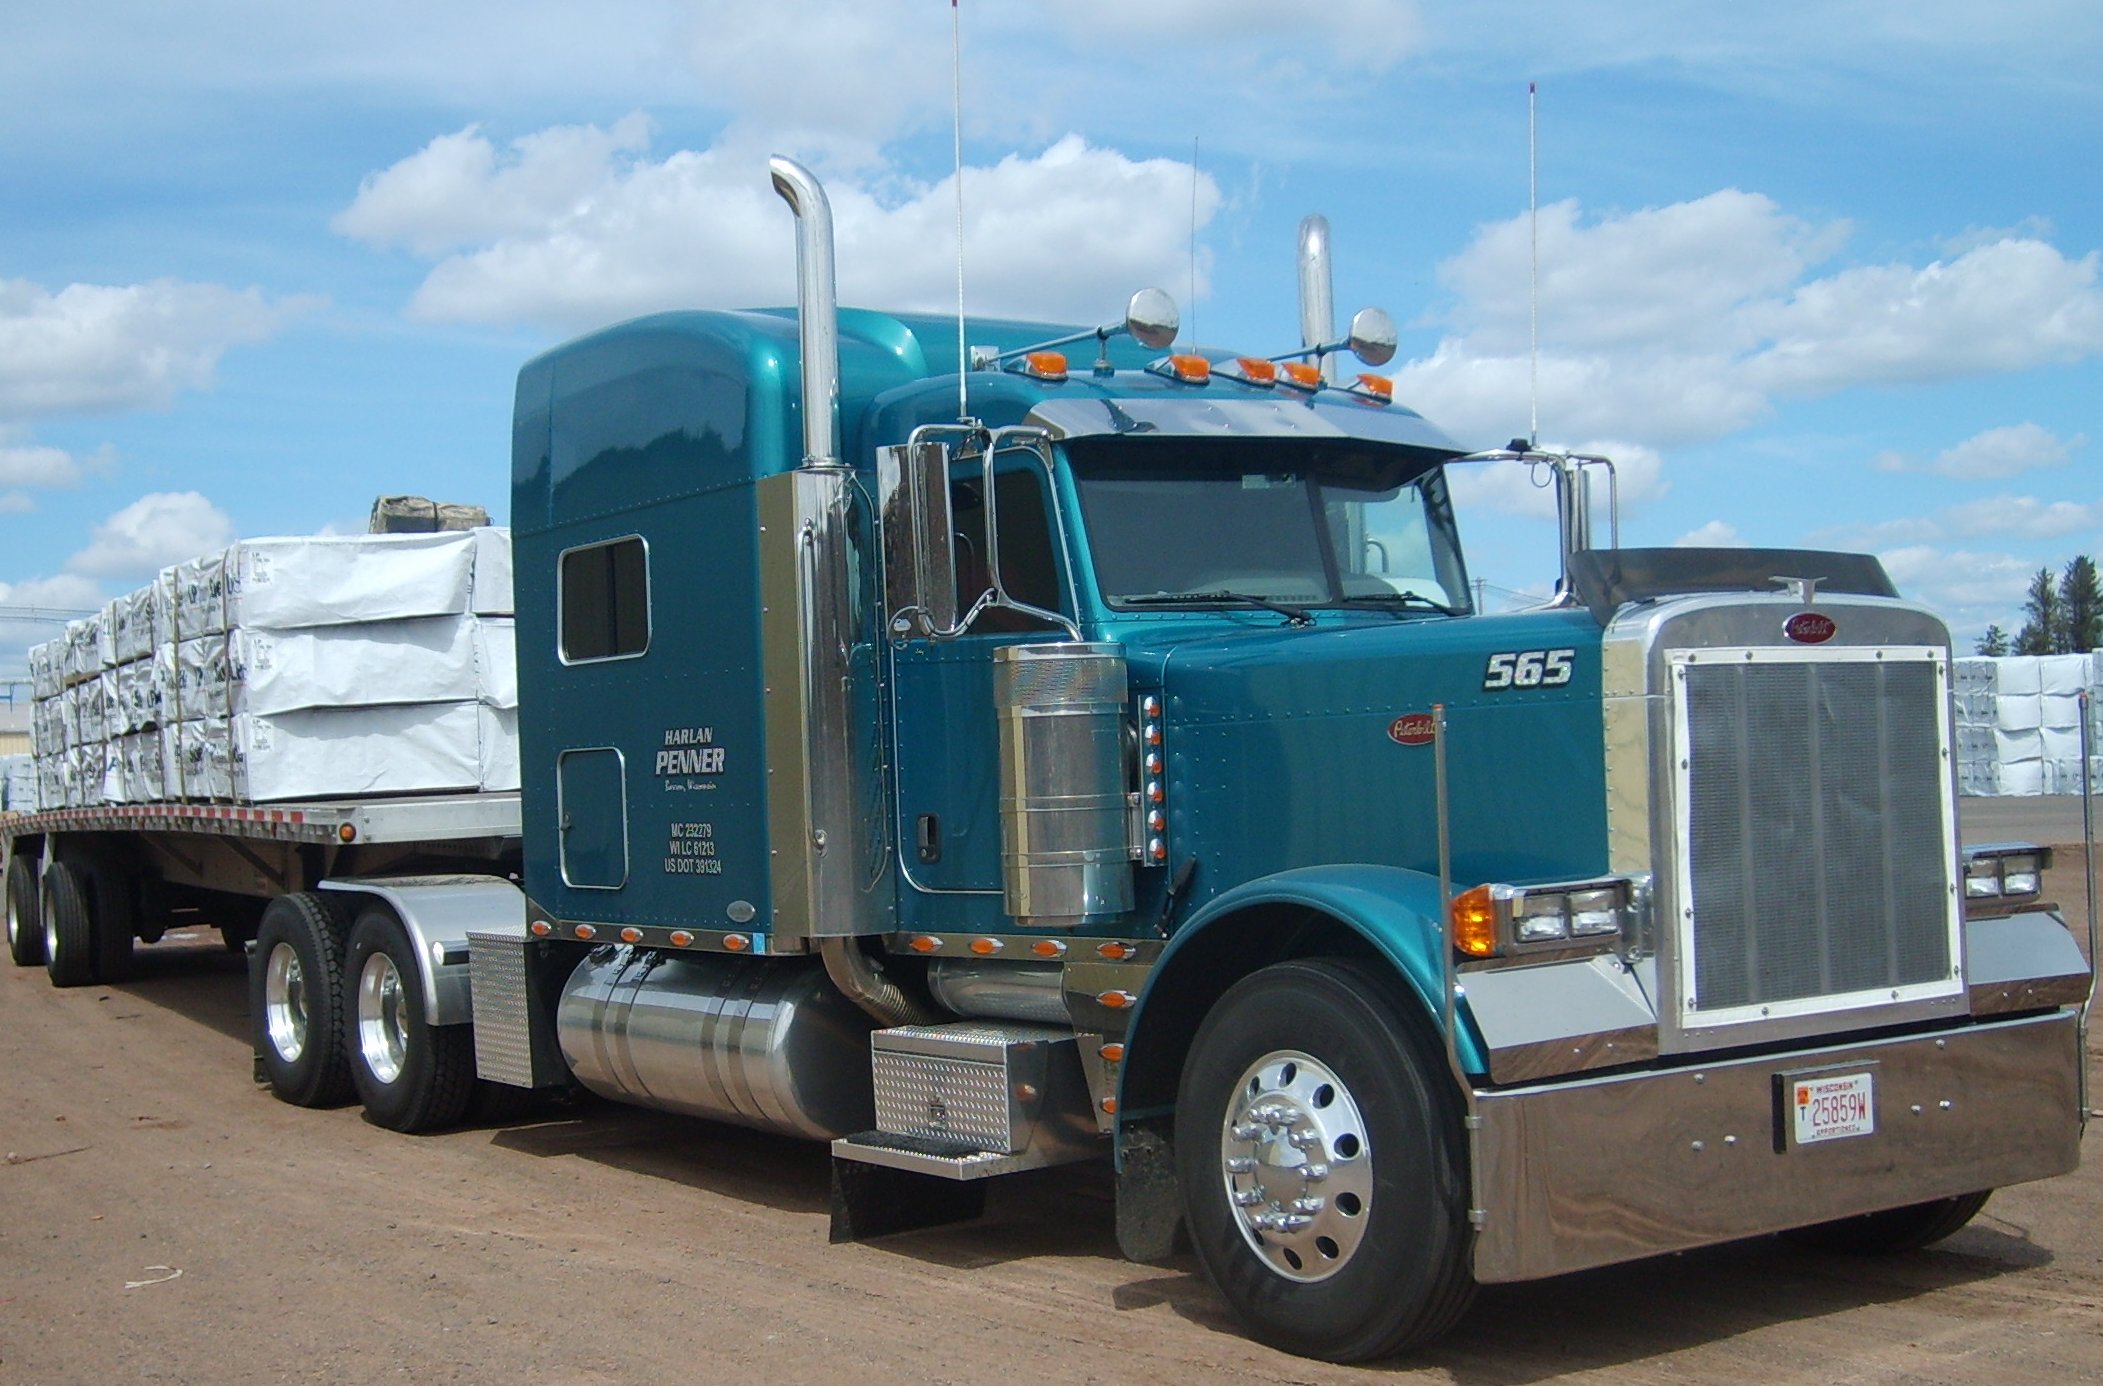 2007 Peterbilt-click to see larger image